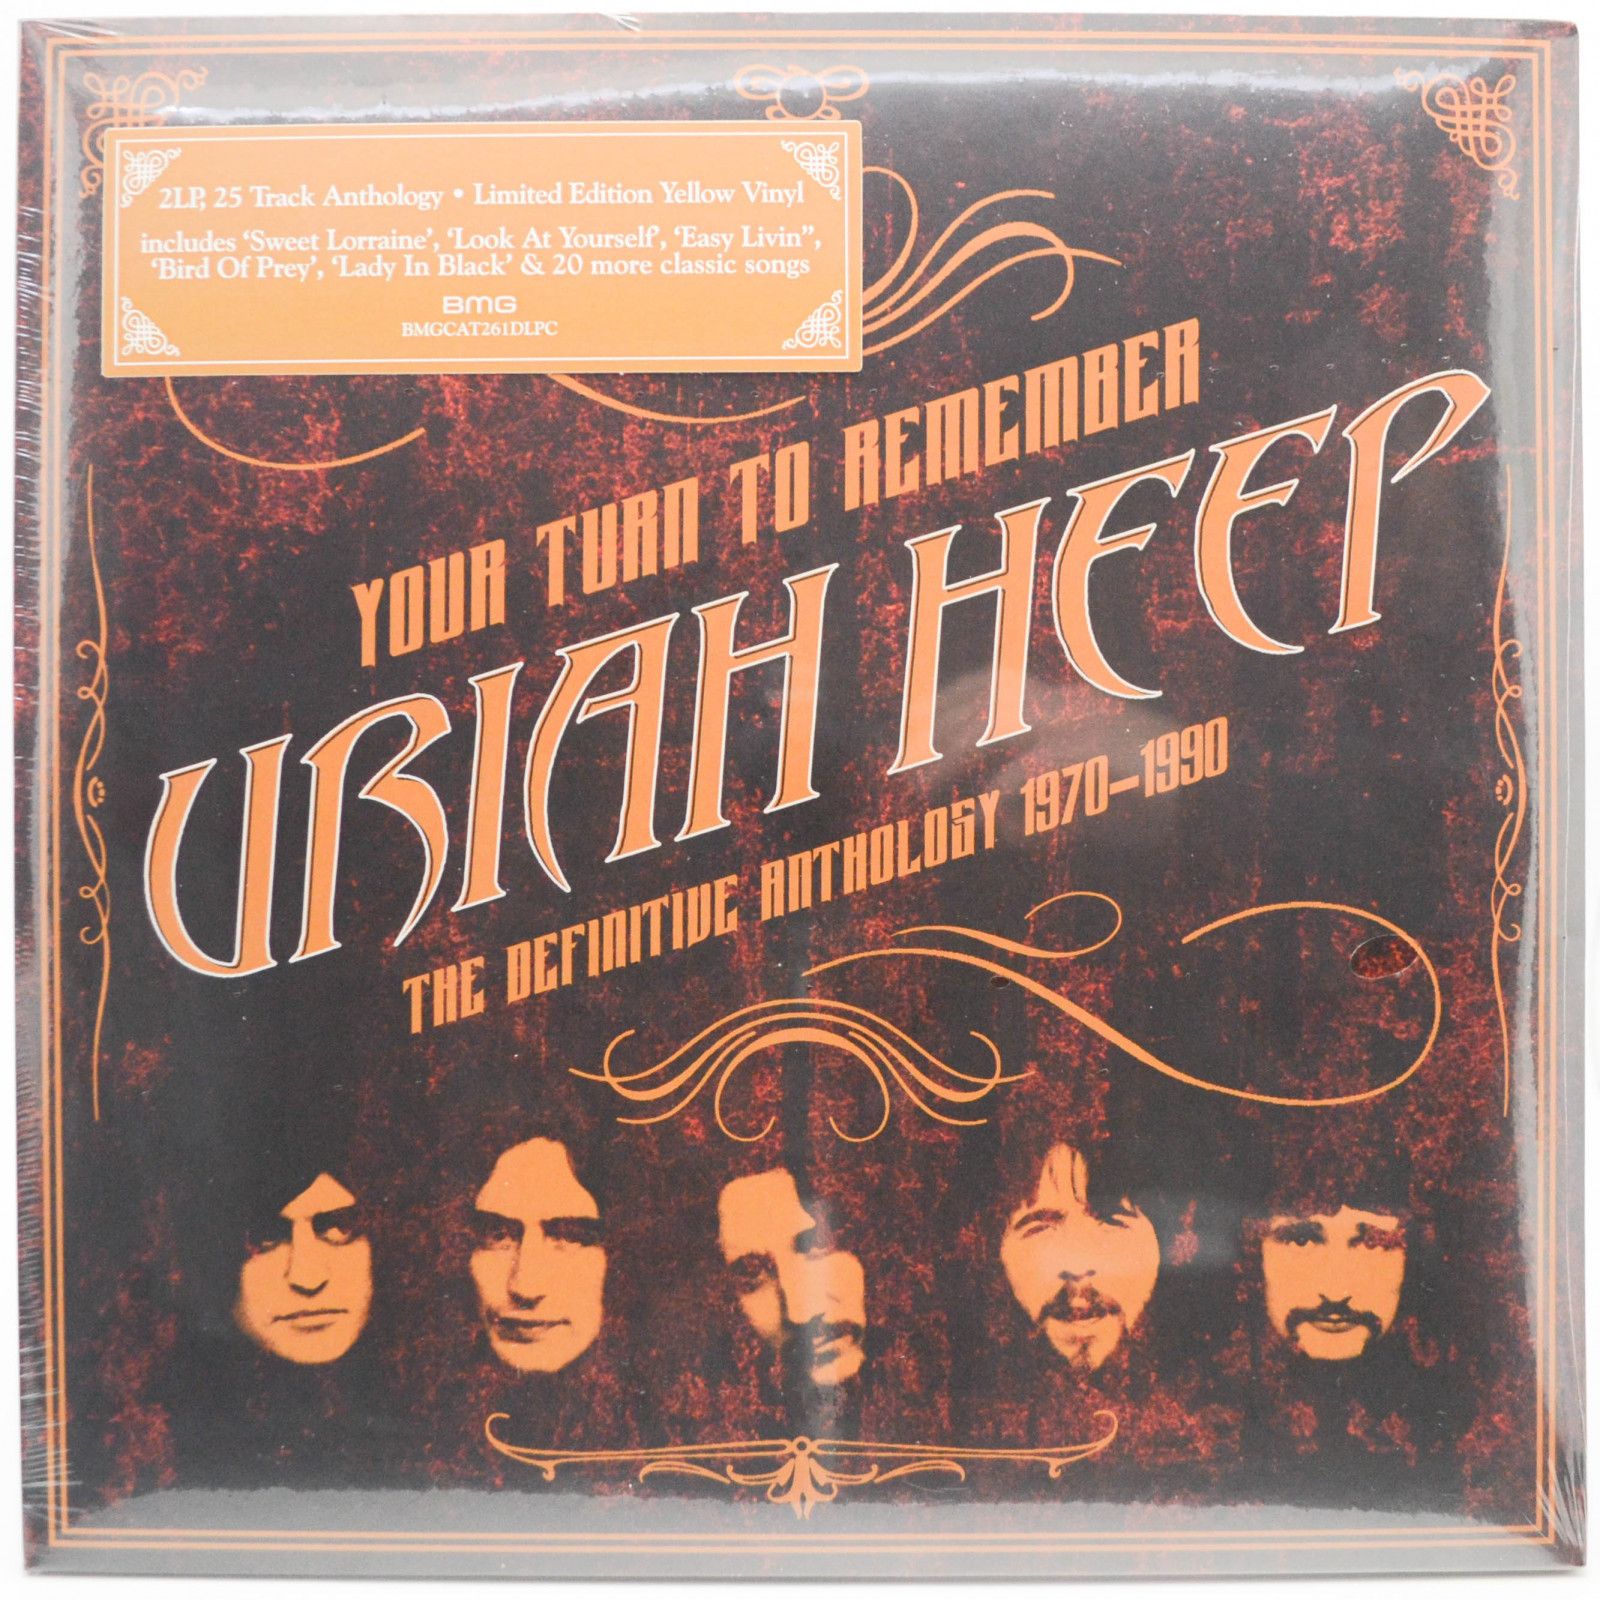 Uriah Heep — Your Turn To Remember - The Definitive Anthology 1970-1990 (2LP), 2023